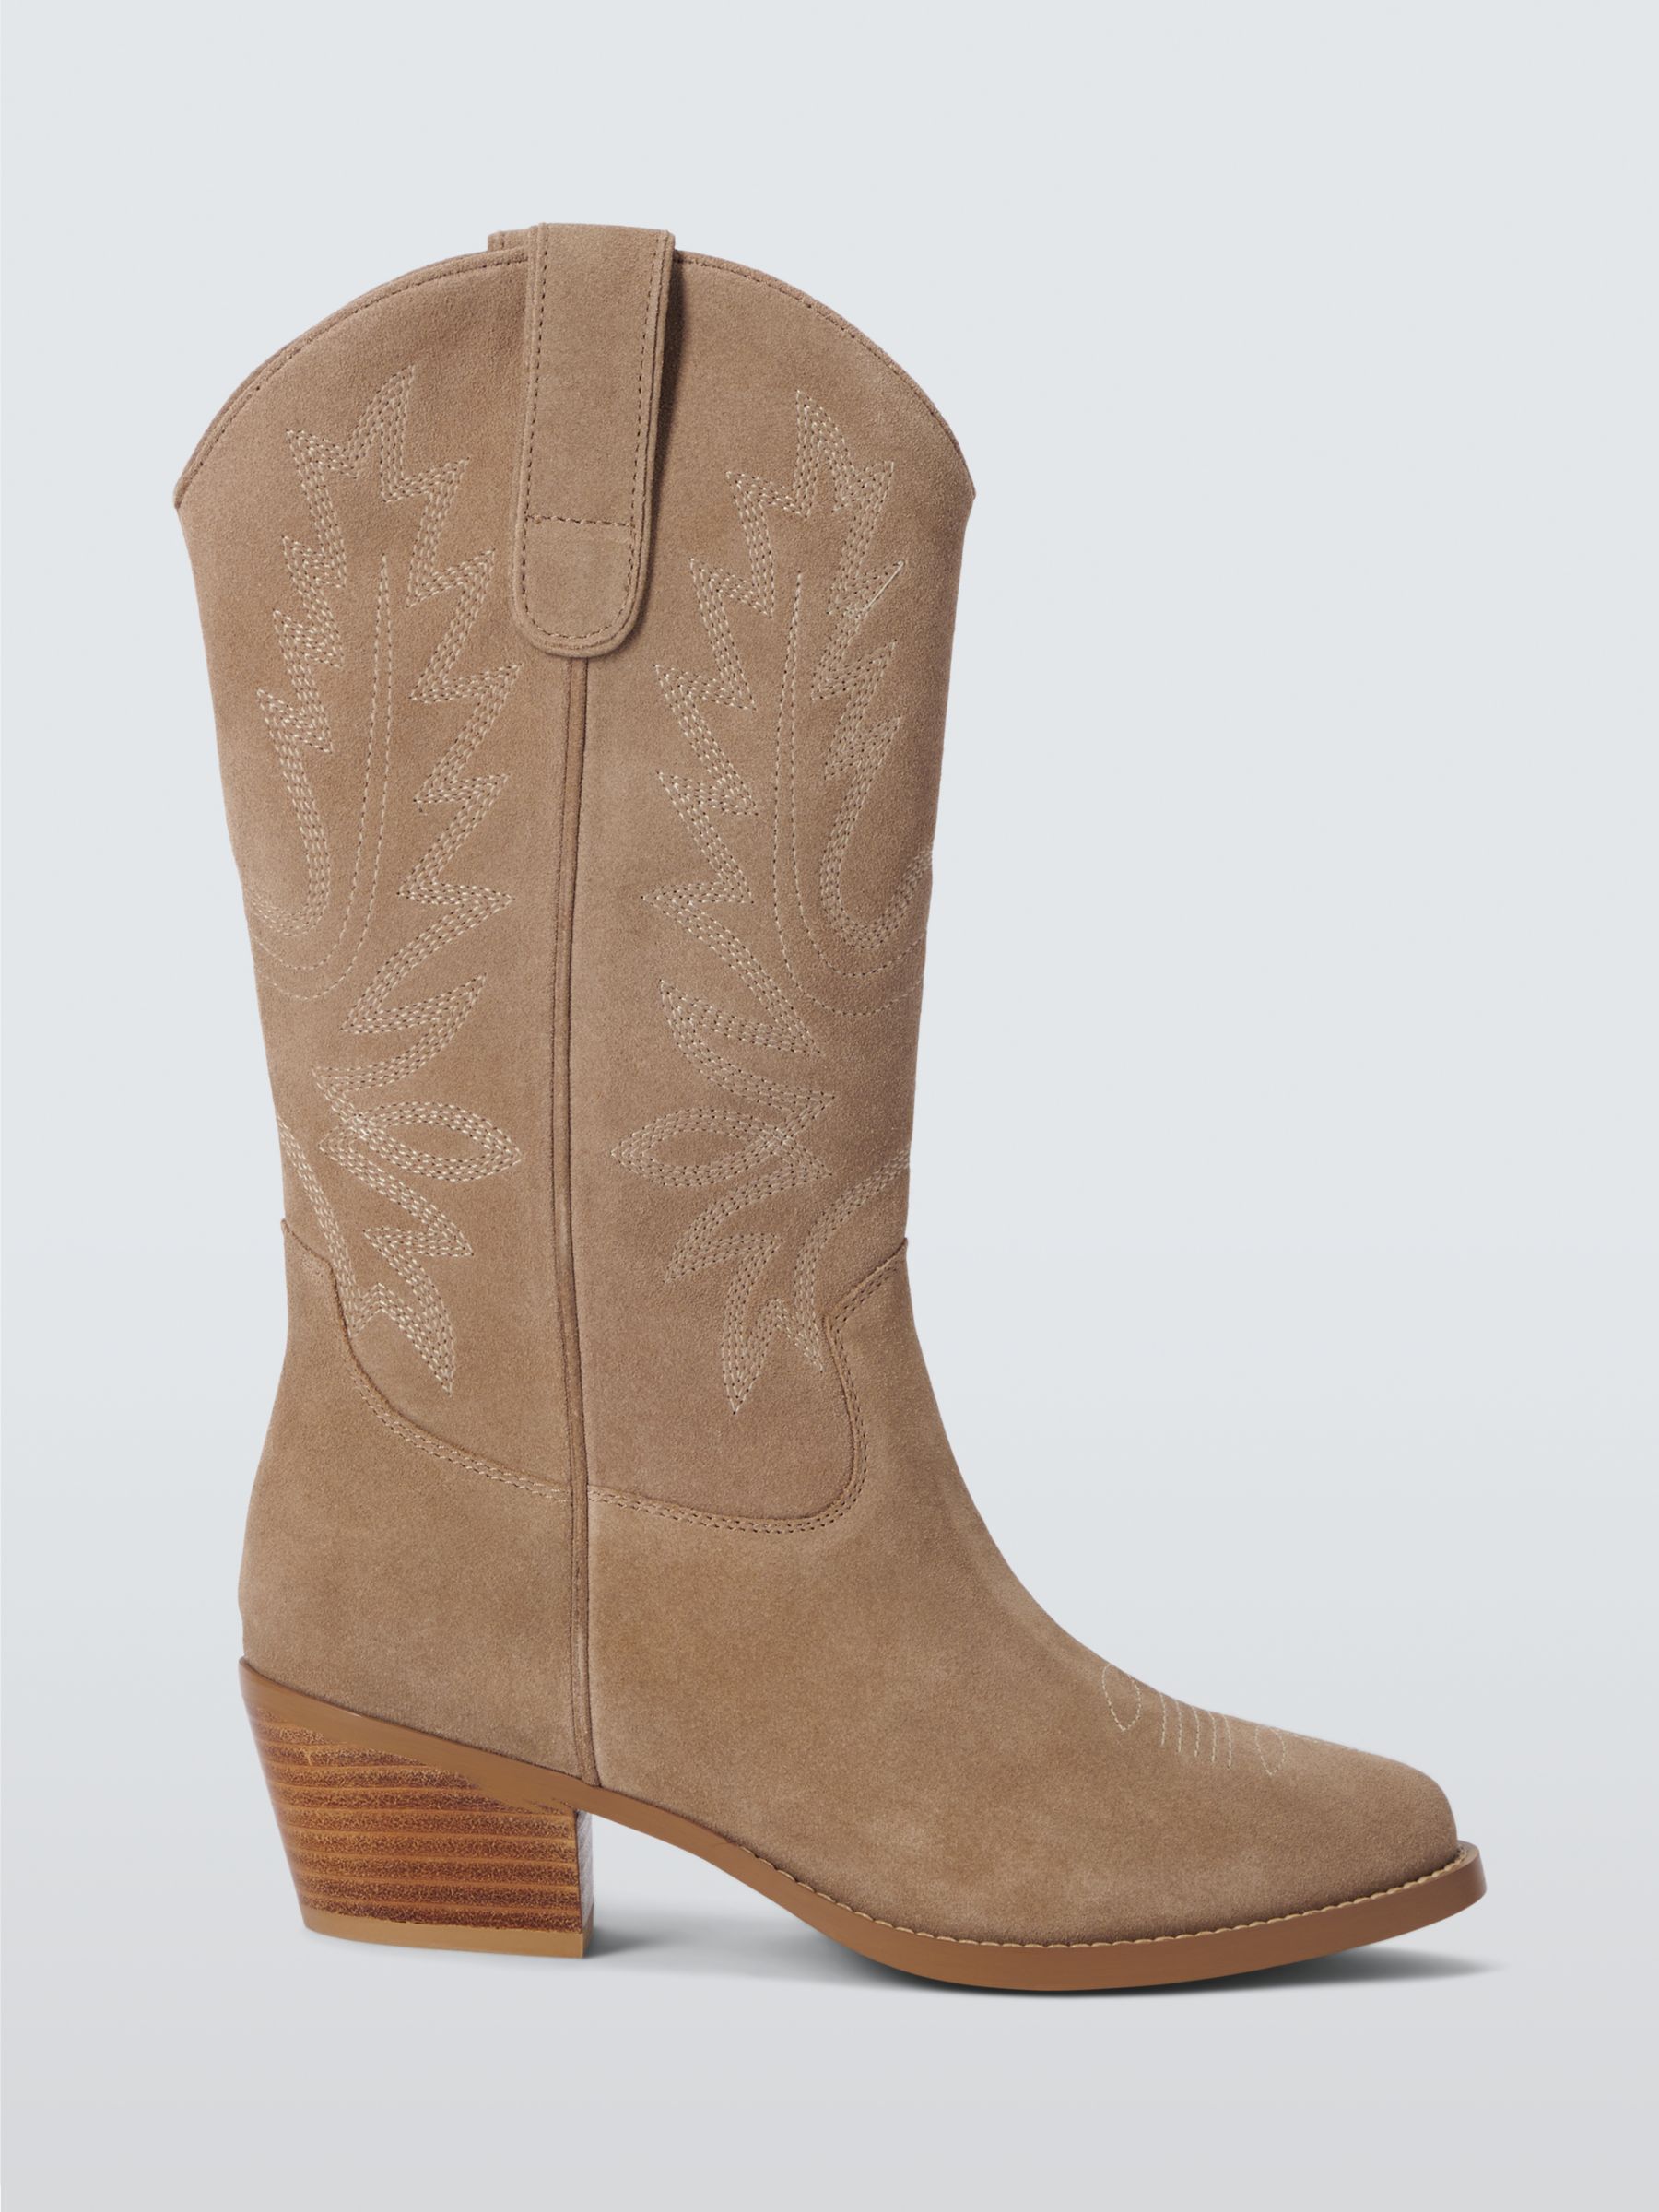 AND/OR Thorn Suede Embroidered Long Western Boots, Sand, 5